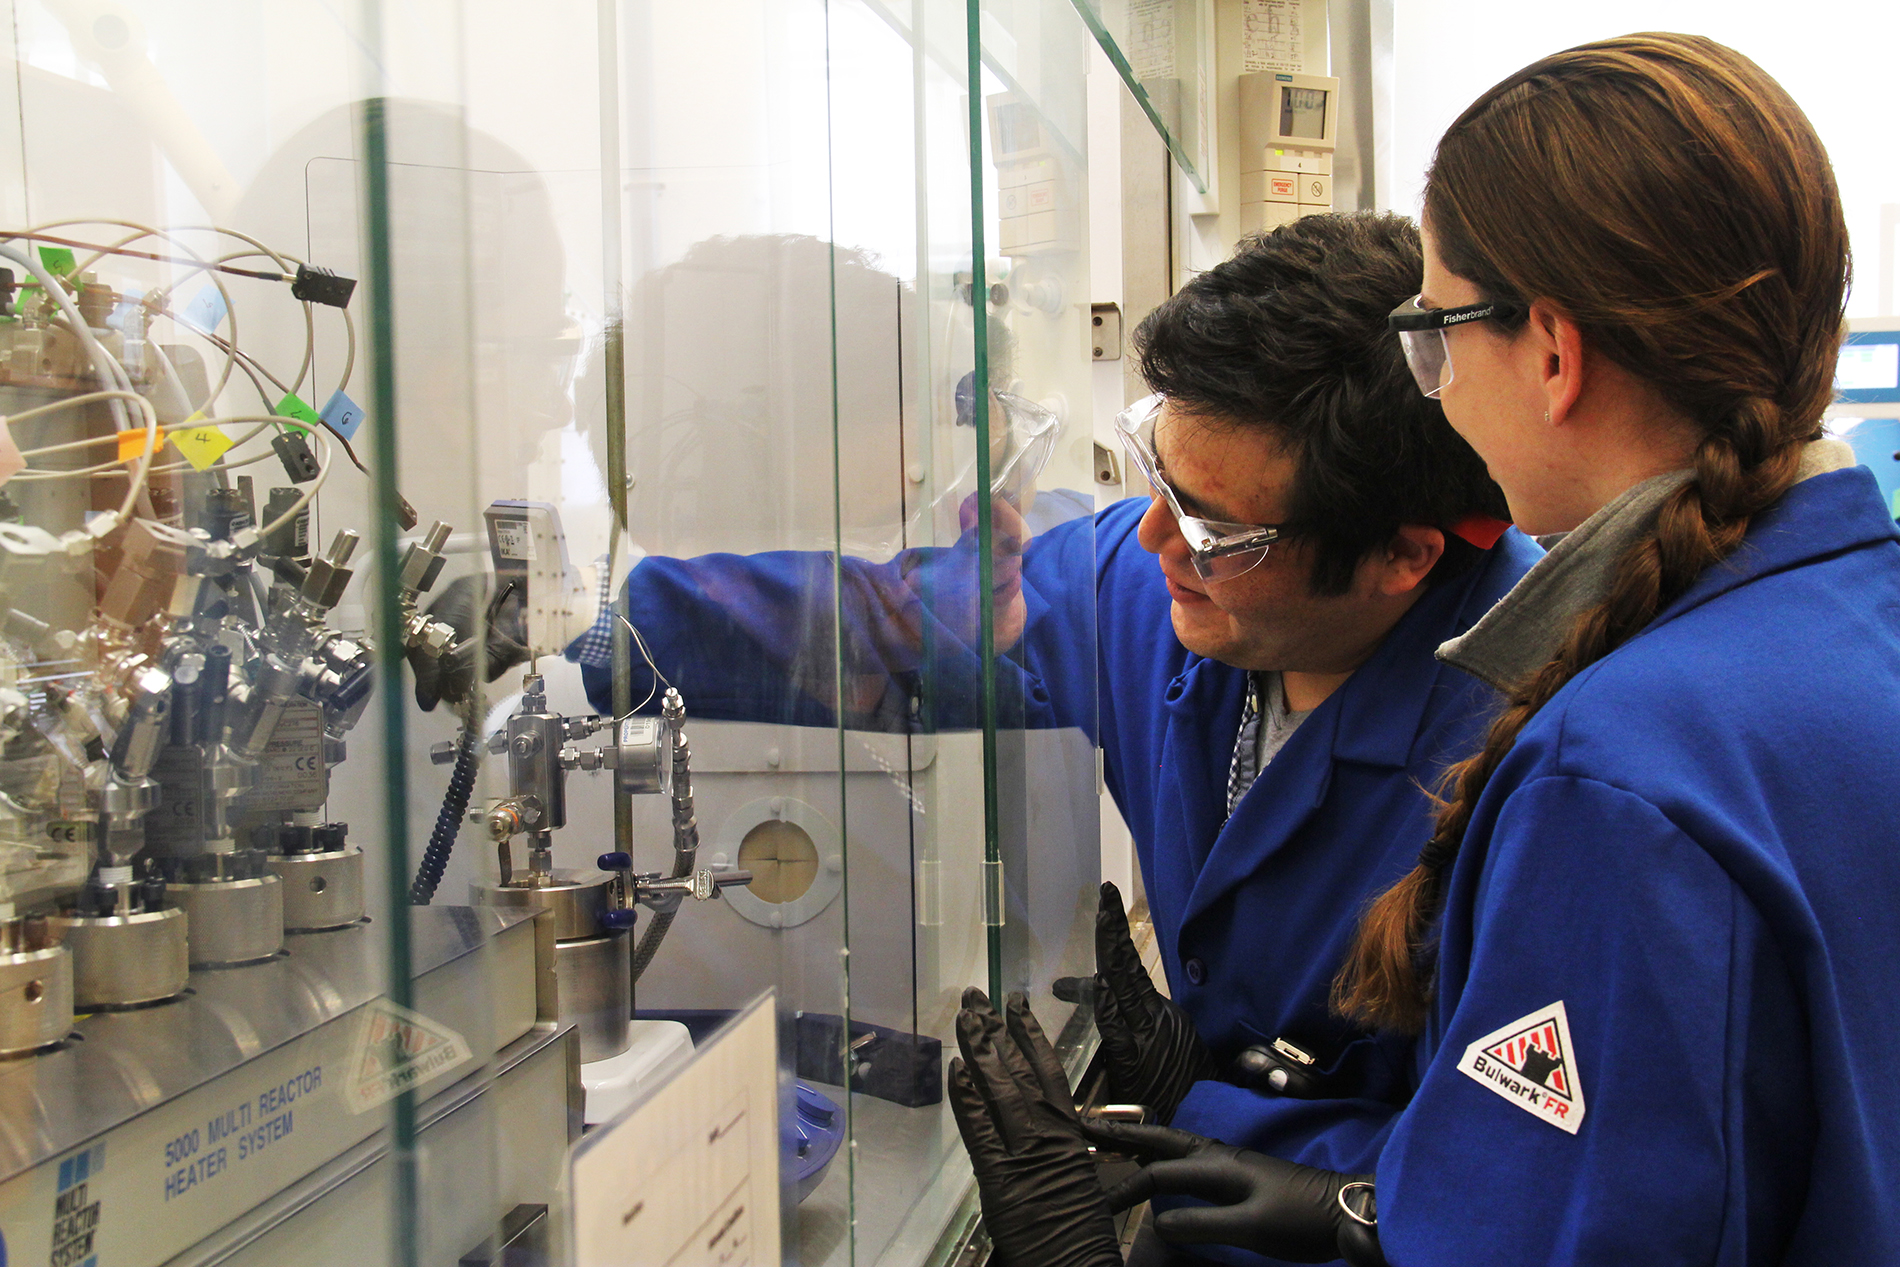 a woman and a man in blue lab coats lower the pressure gage on technical equipment inside a lab